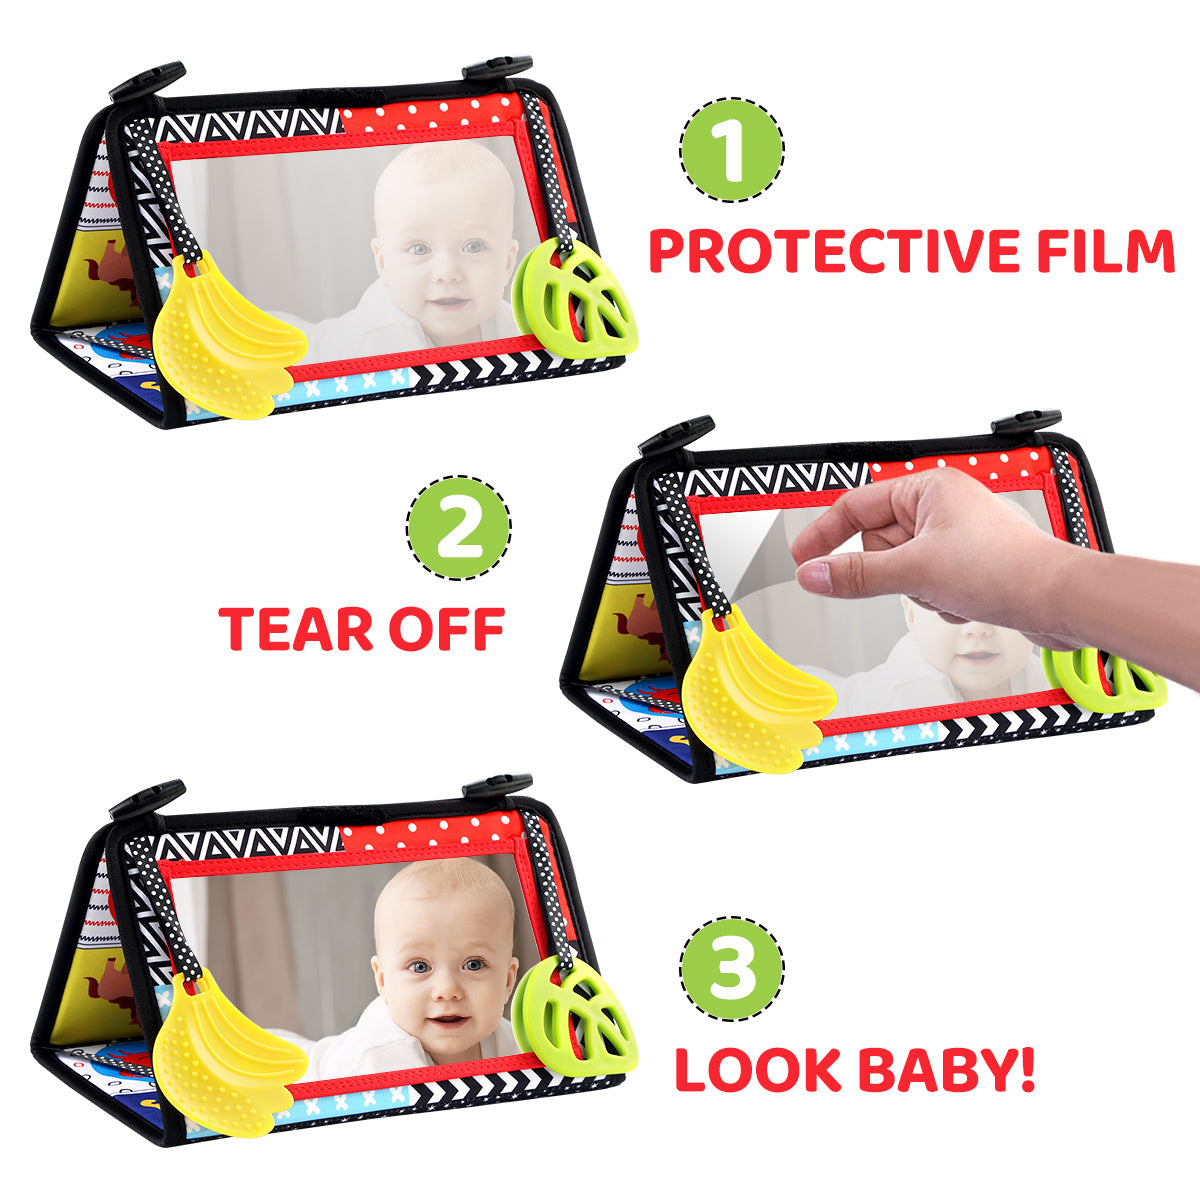 Joyfia Tummy Time Floor Mirror, High Contrast Baby Book, Soft Crinkle Cloth Book with Teethers, Activity Sensory Developmental Gift Toys for Infants Newborn Boys Girls 0-12 Months